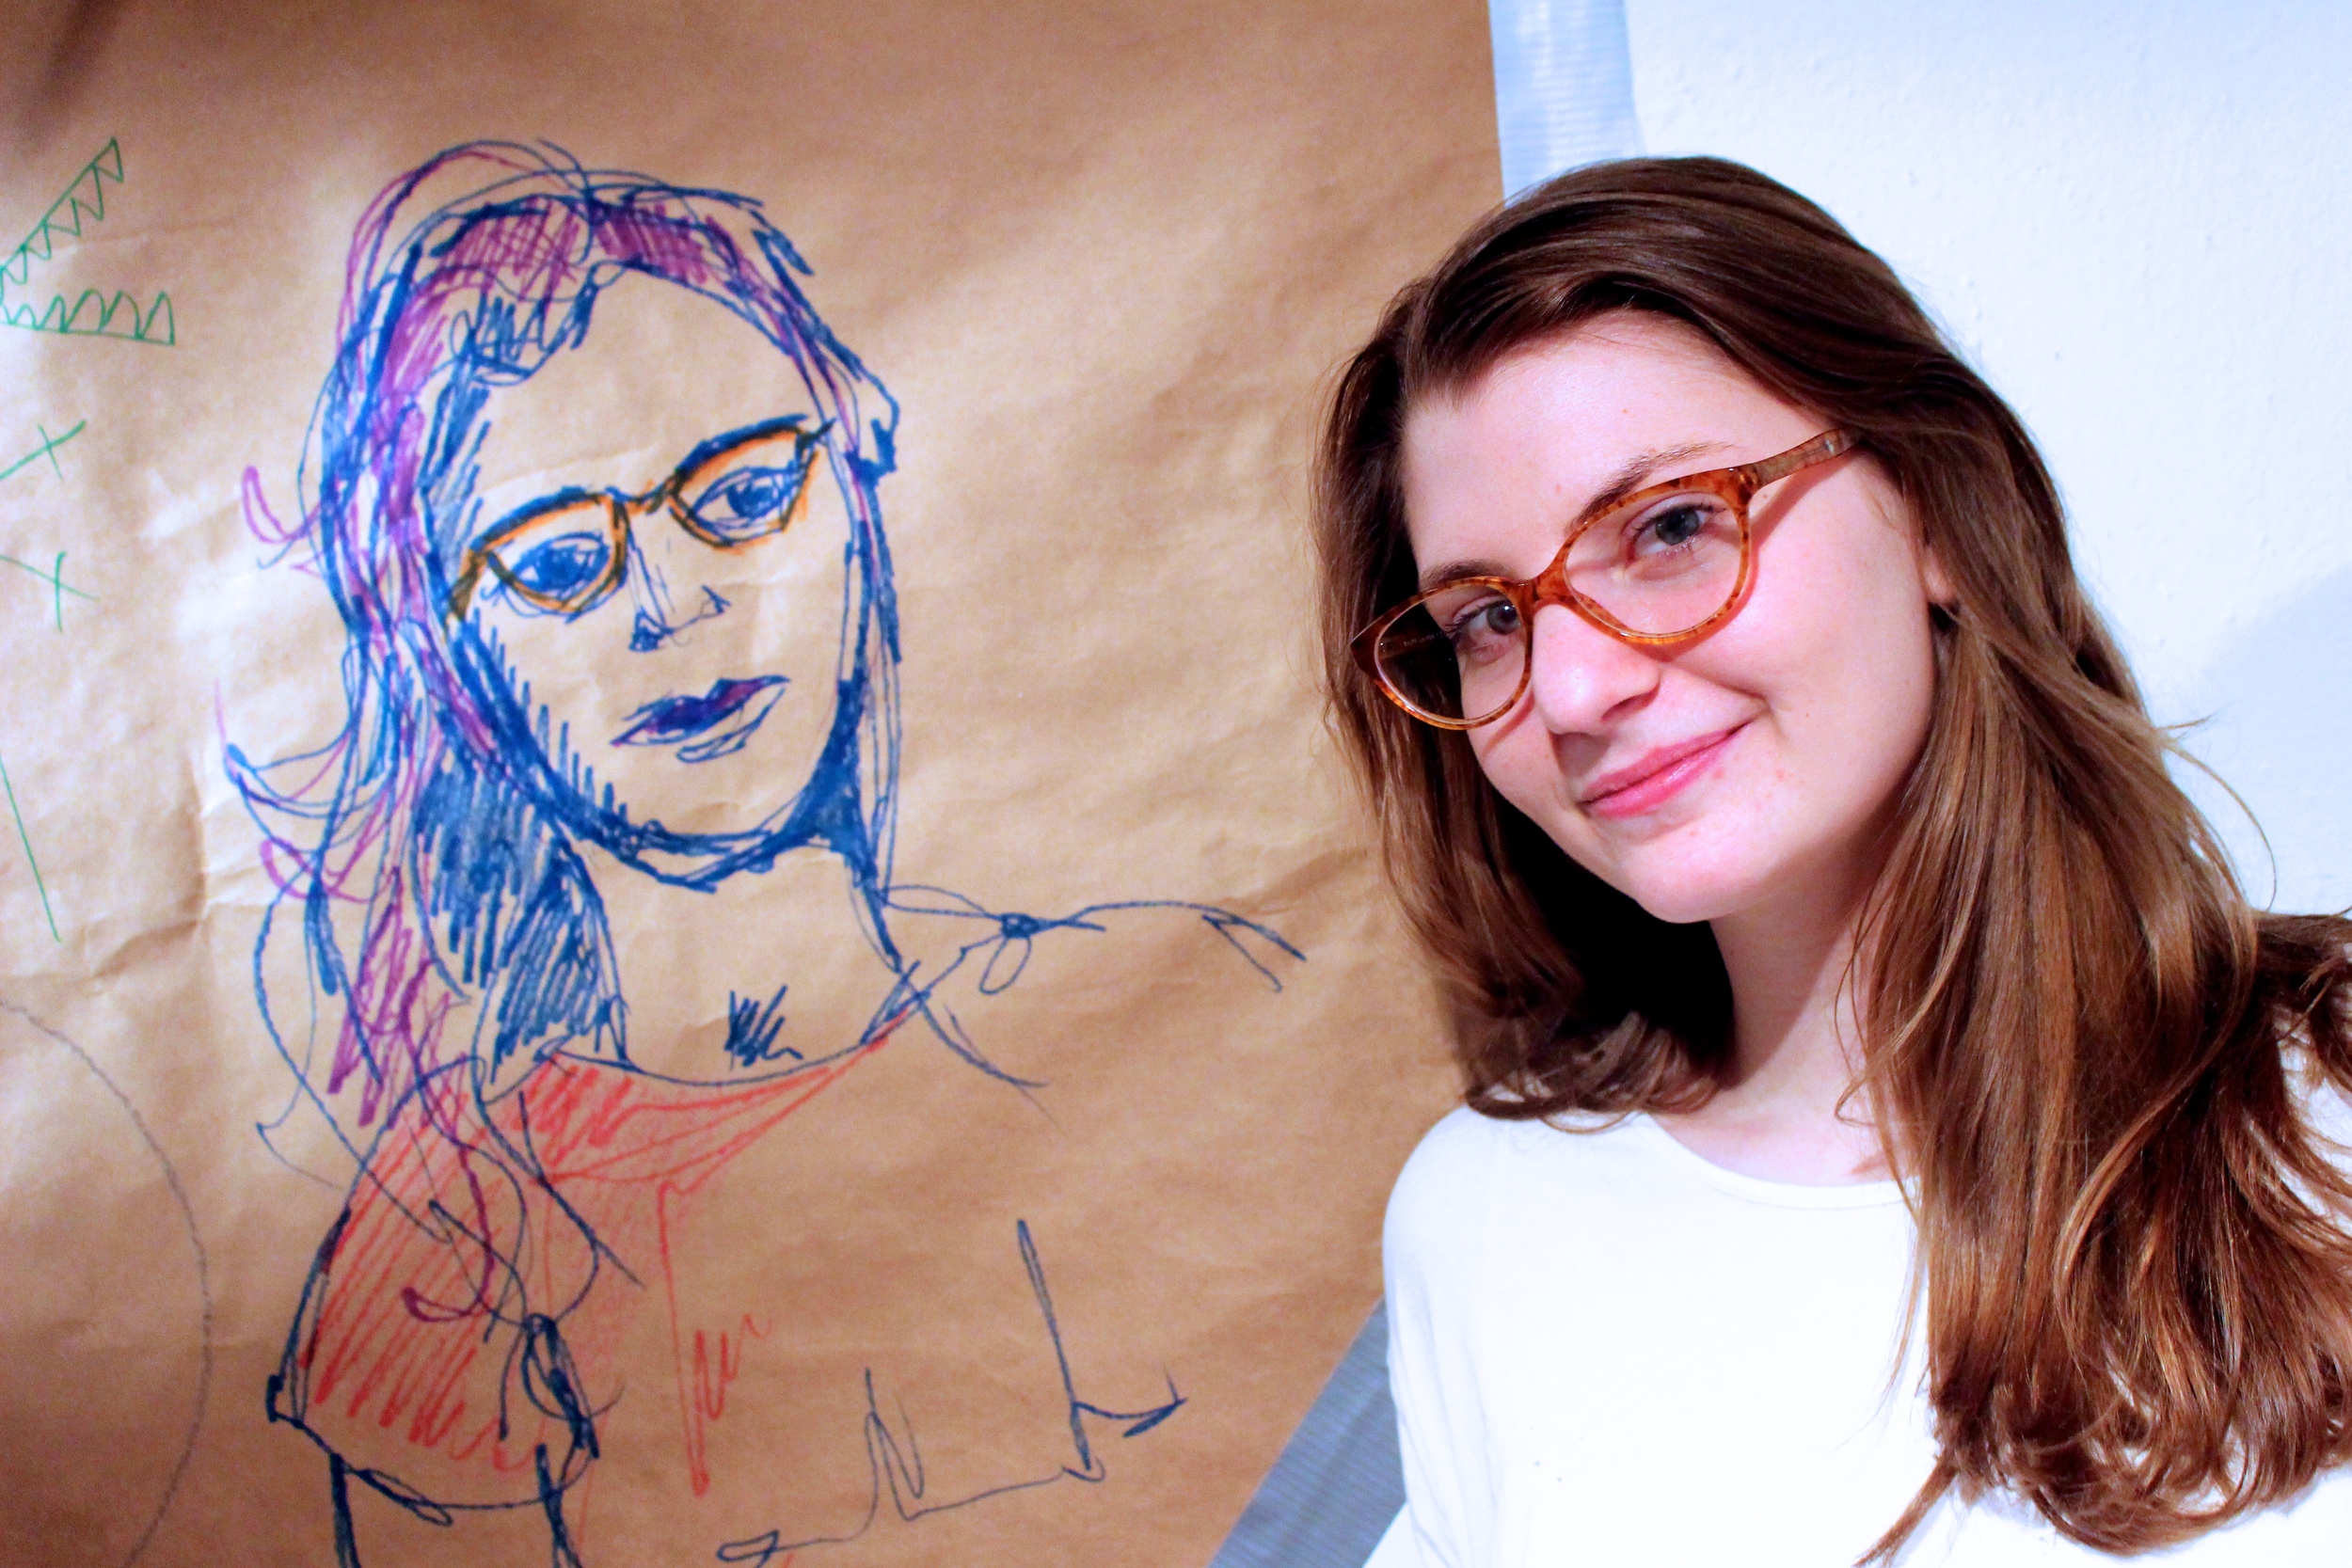  Lilly Rosner '14 poses next to a portrait done by Lili Boisrond '17 